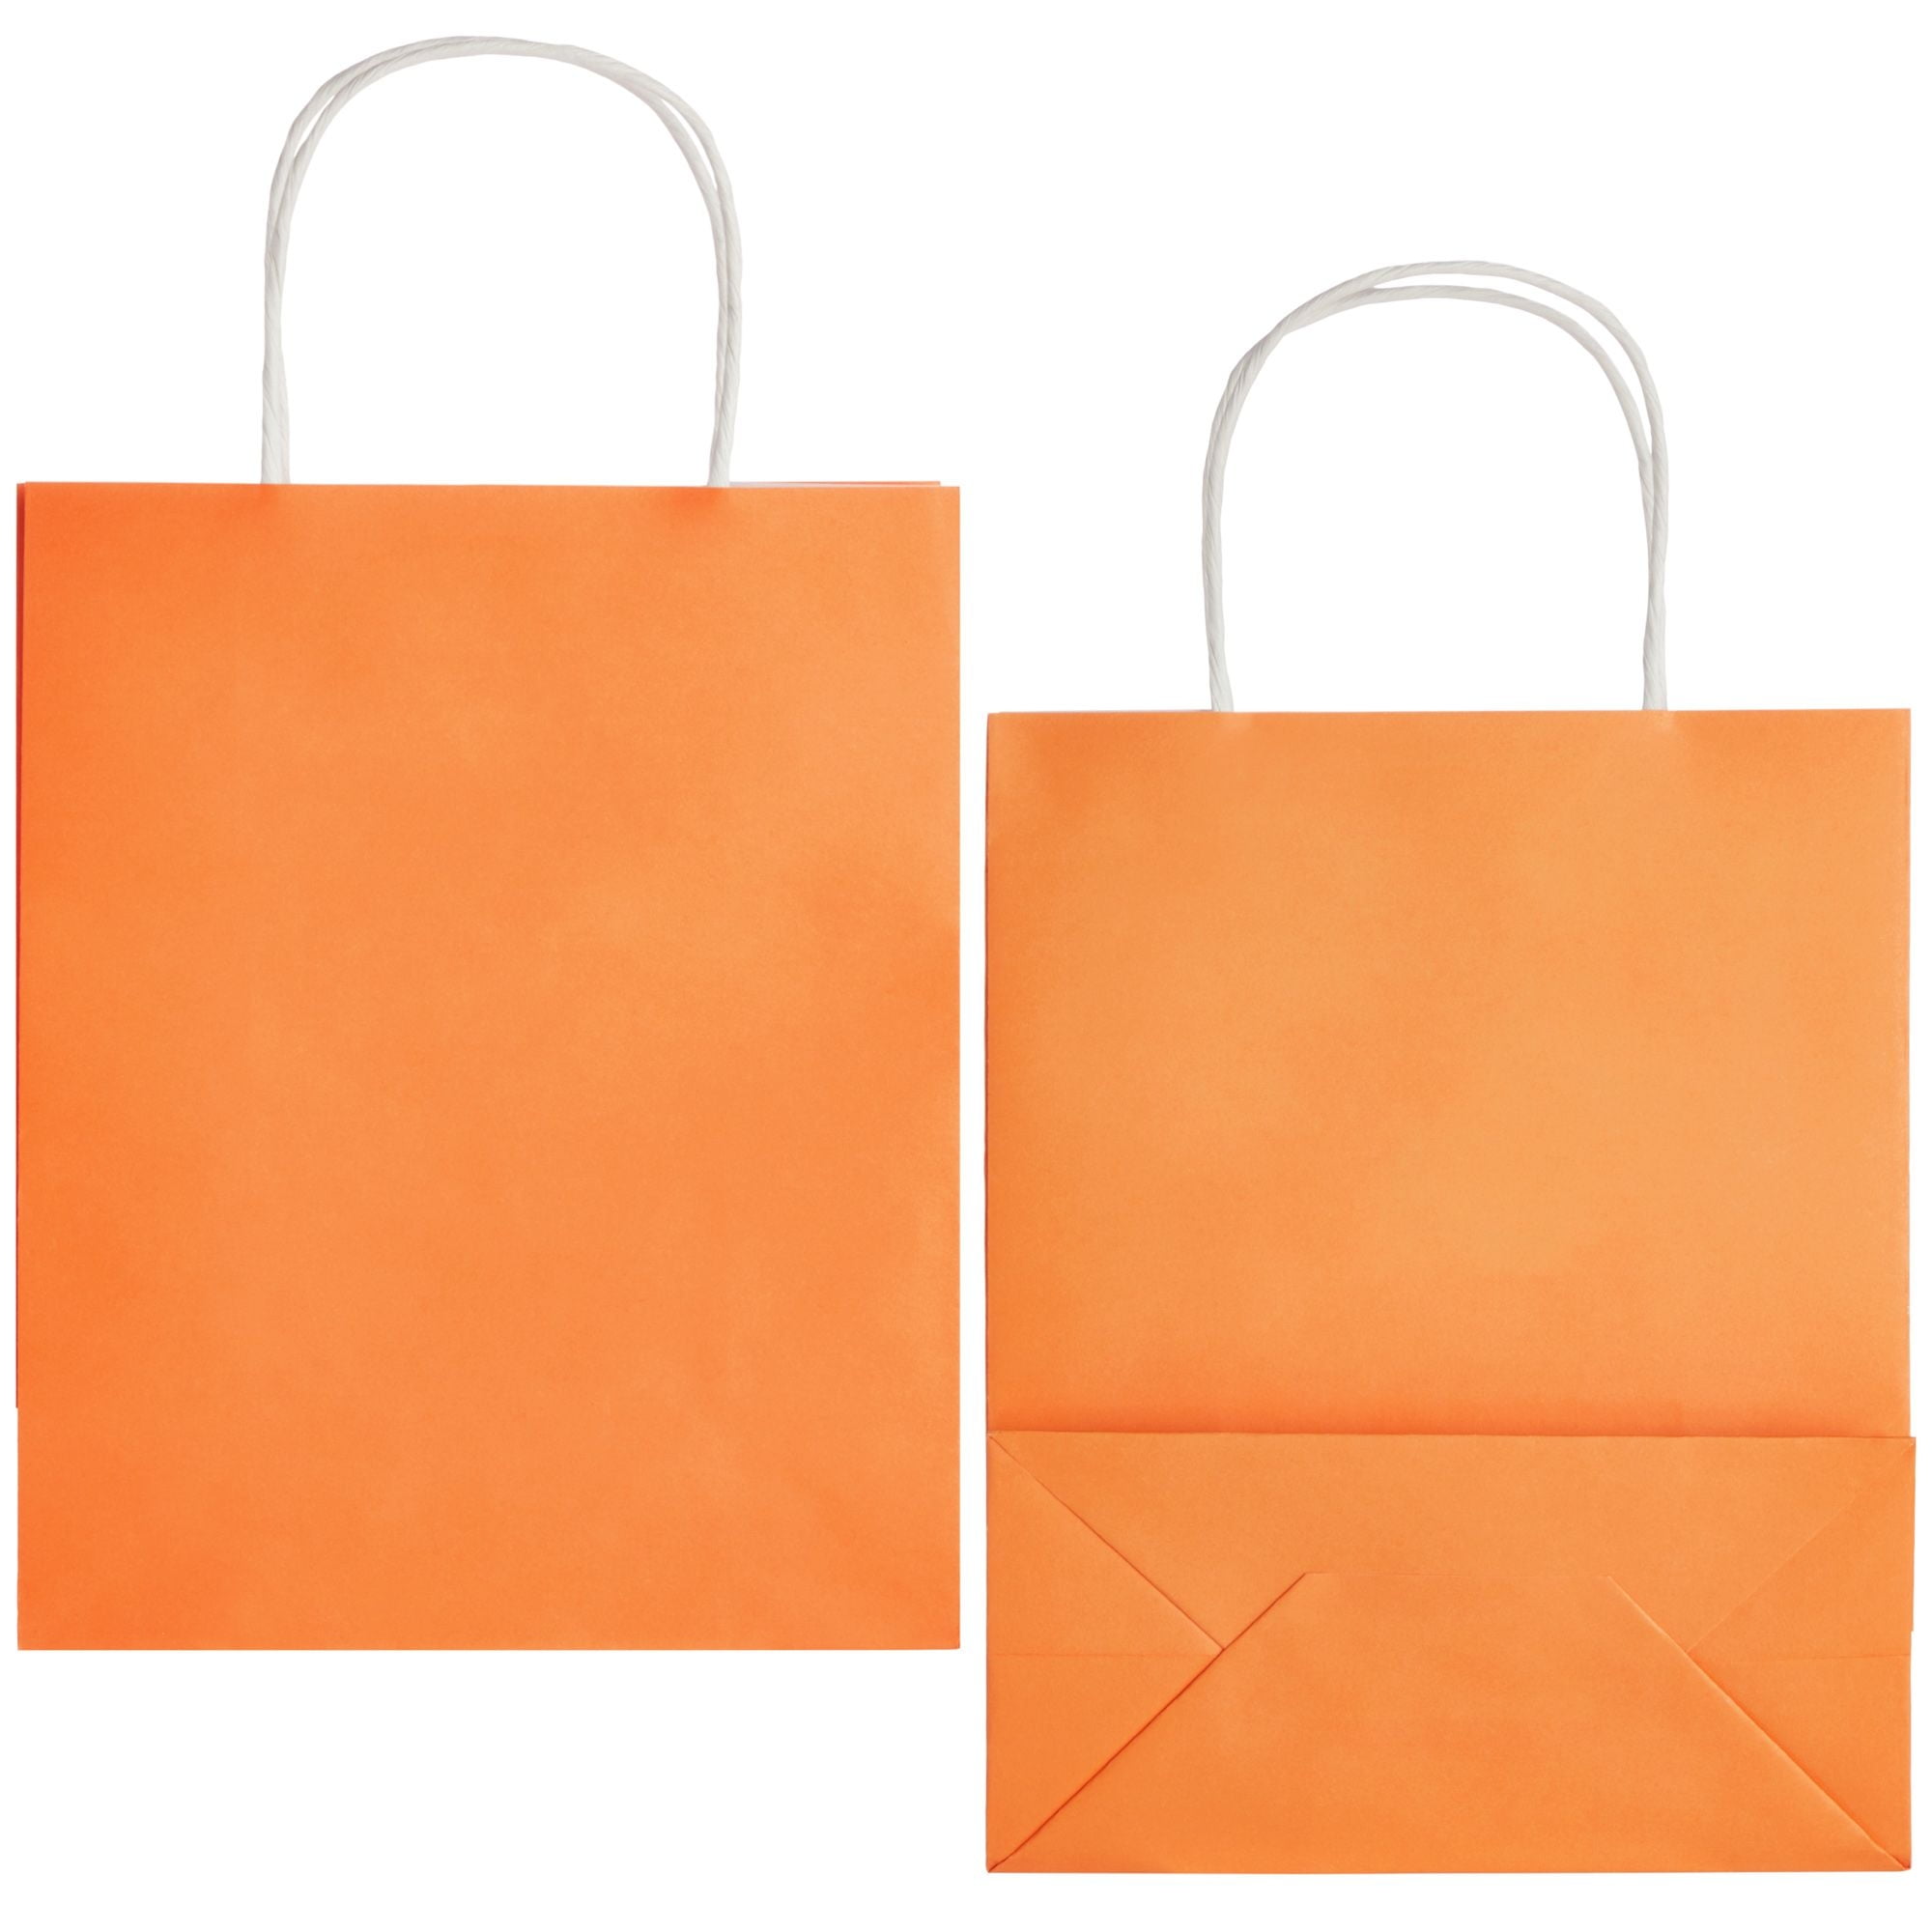  Kolaxen Orange Kraft Paper Gift Bags with Tissue Paper 24 Pcs  10.6 * 7.9 * 4.3 inches, Medium Gift Bags with Handles for Halloween,  Birthday, Party, Wedding, Baby Shower… : Health & Household